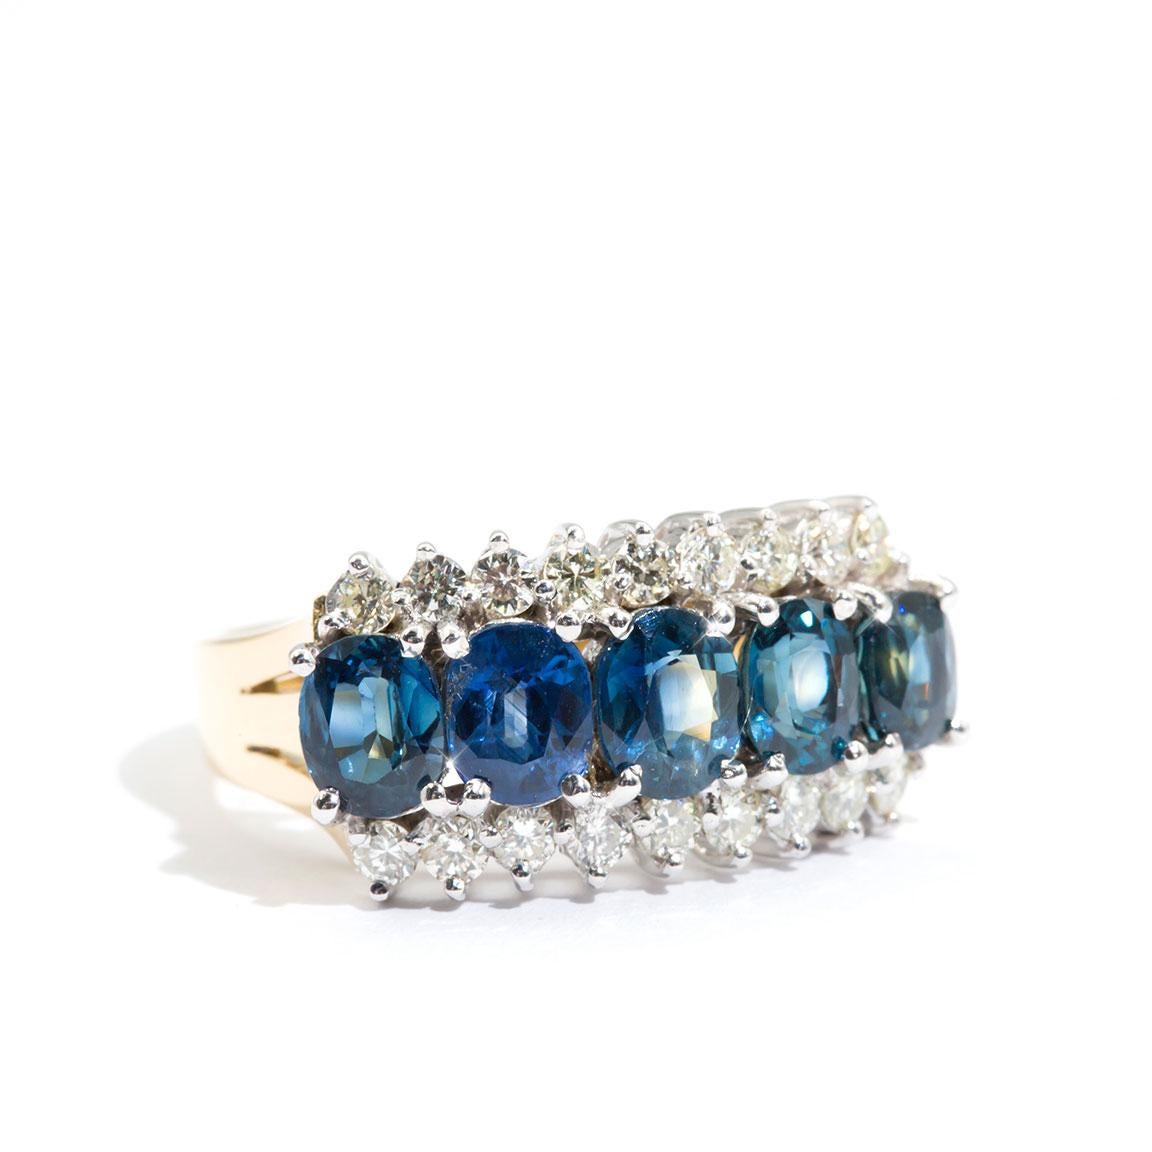 Carefully crafted in 18 carat gold is this enchanting vintage ring featuring five striking oval blue sapphires encompassed by 0.54 carats of sparkling round brilliant cut diamonds. We have named this gorgeous vintage splendour The Frankie Ring. The